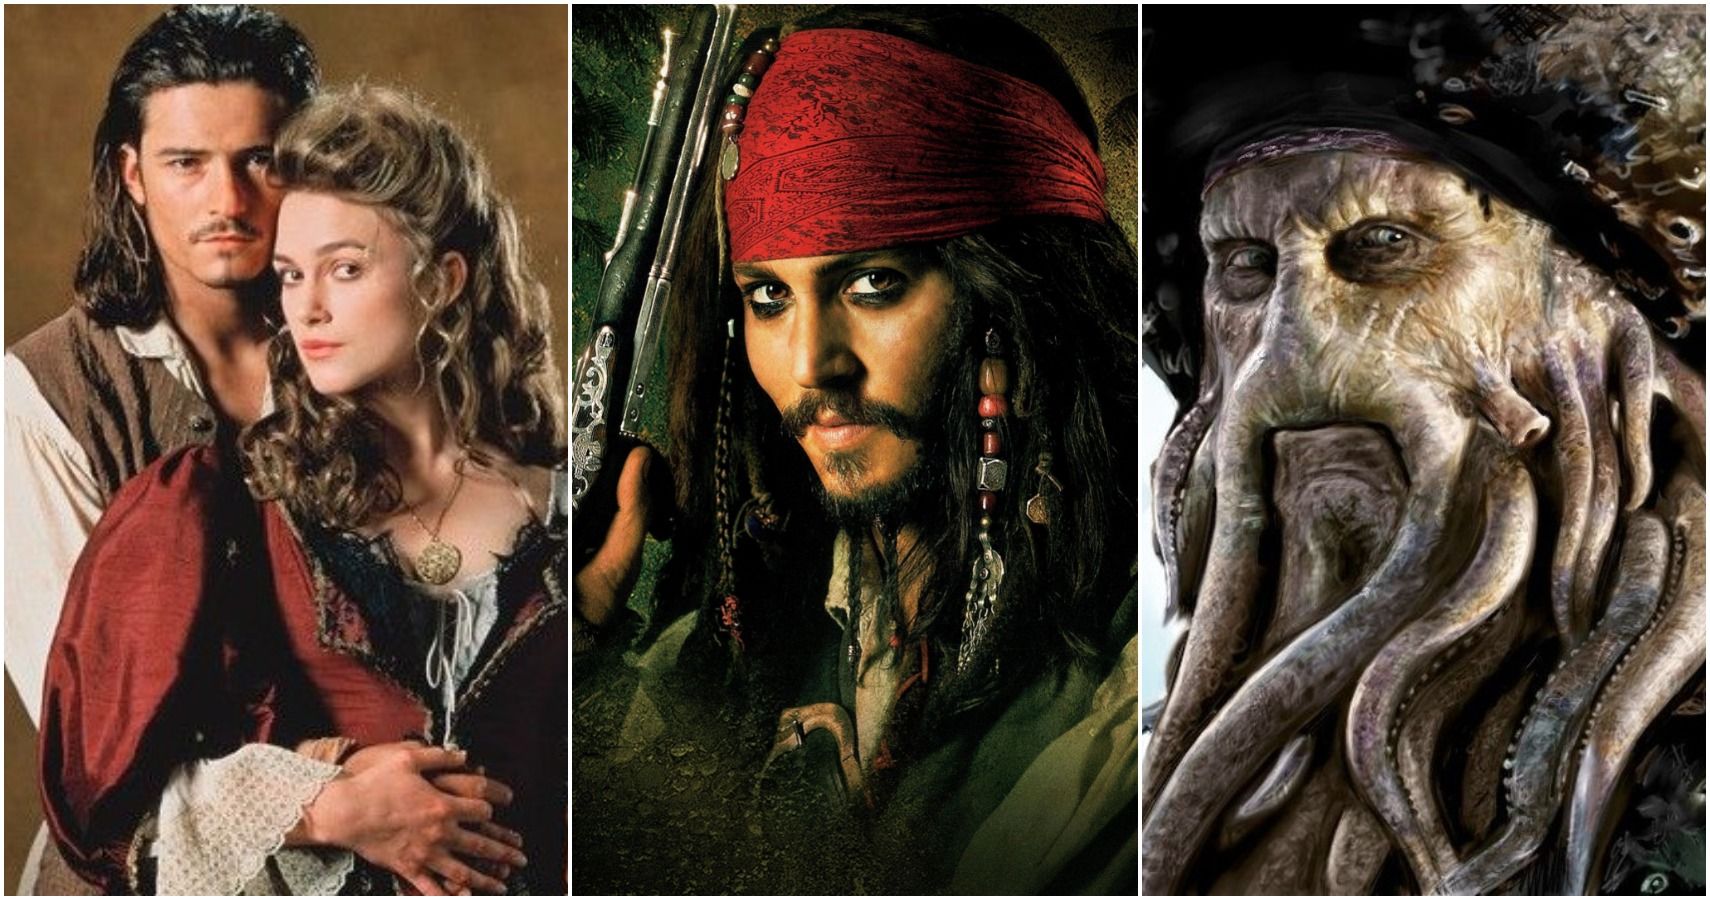 pirates-of-the-caribbean-characters-who-got-fitting-endings-or-deserved-more-featured